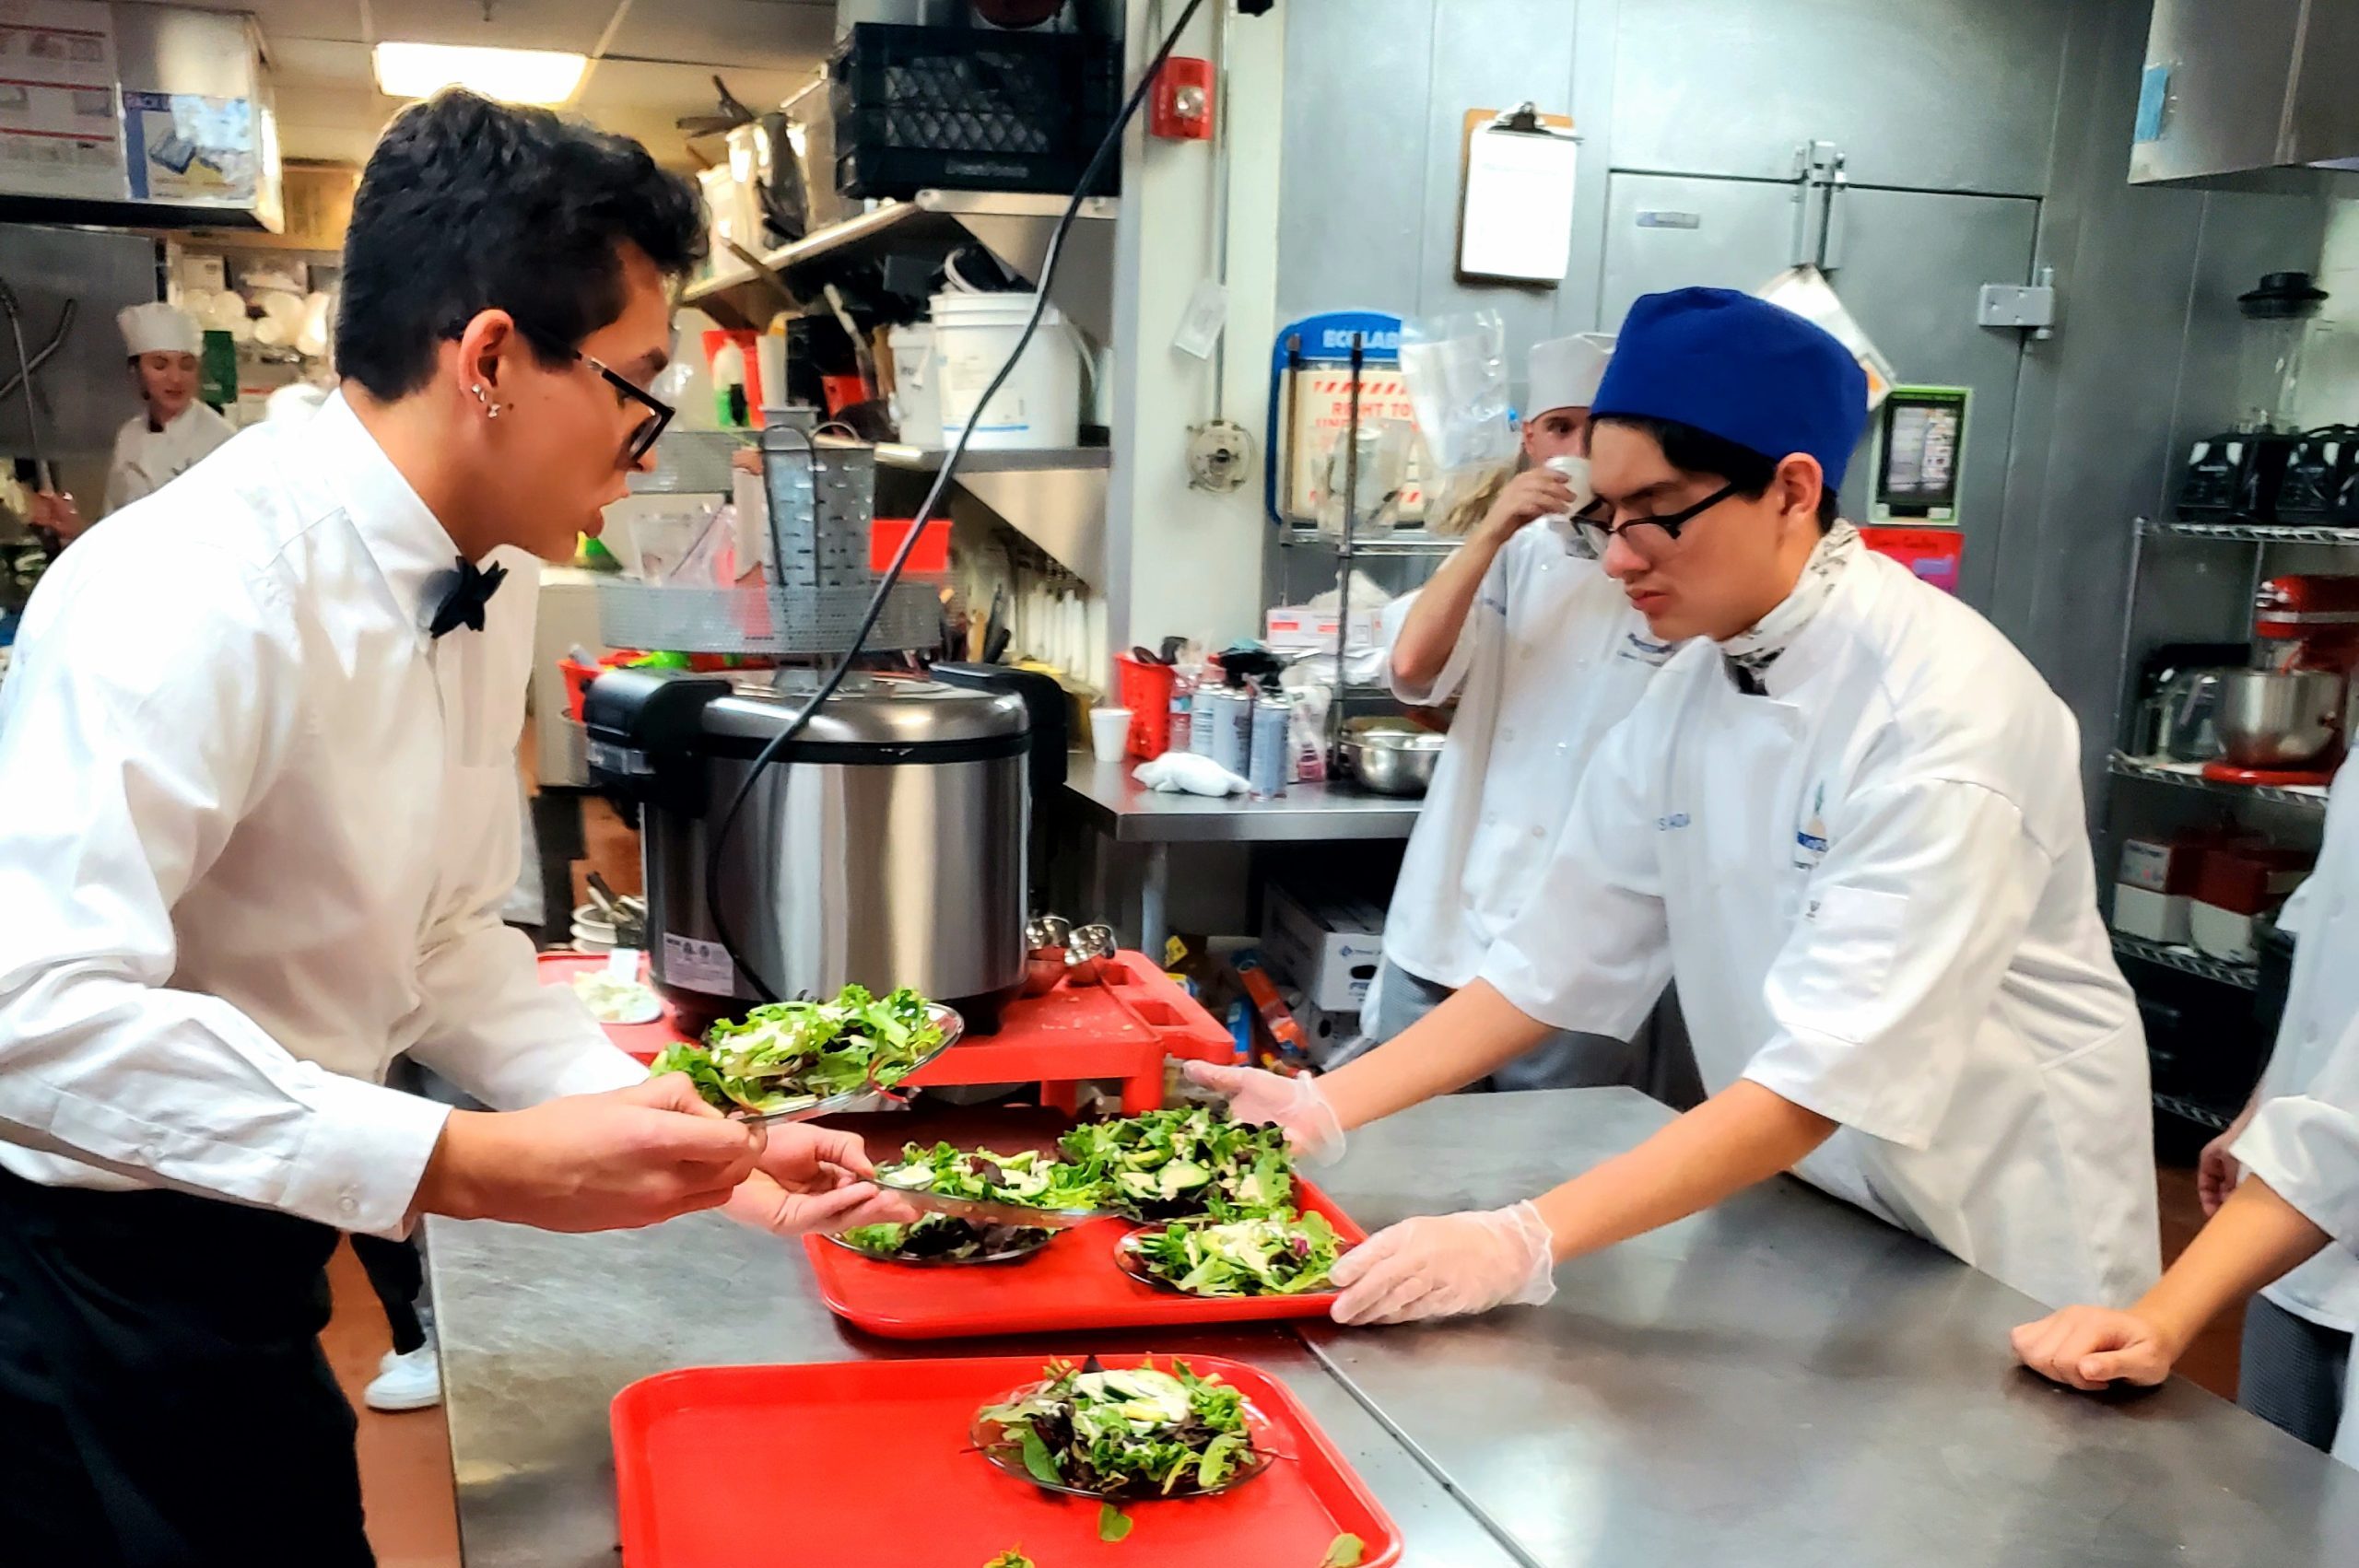 Bon Appétit!: Culinary Students Wow With Their Cooking Skills